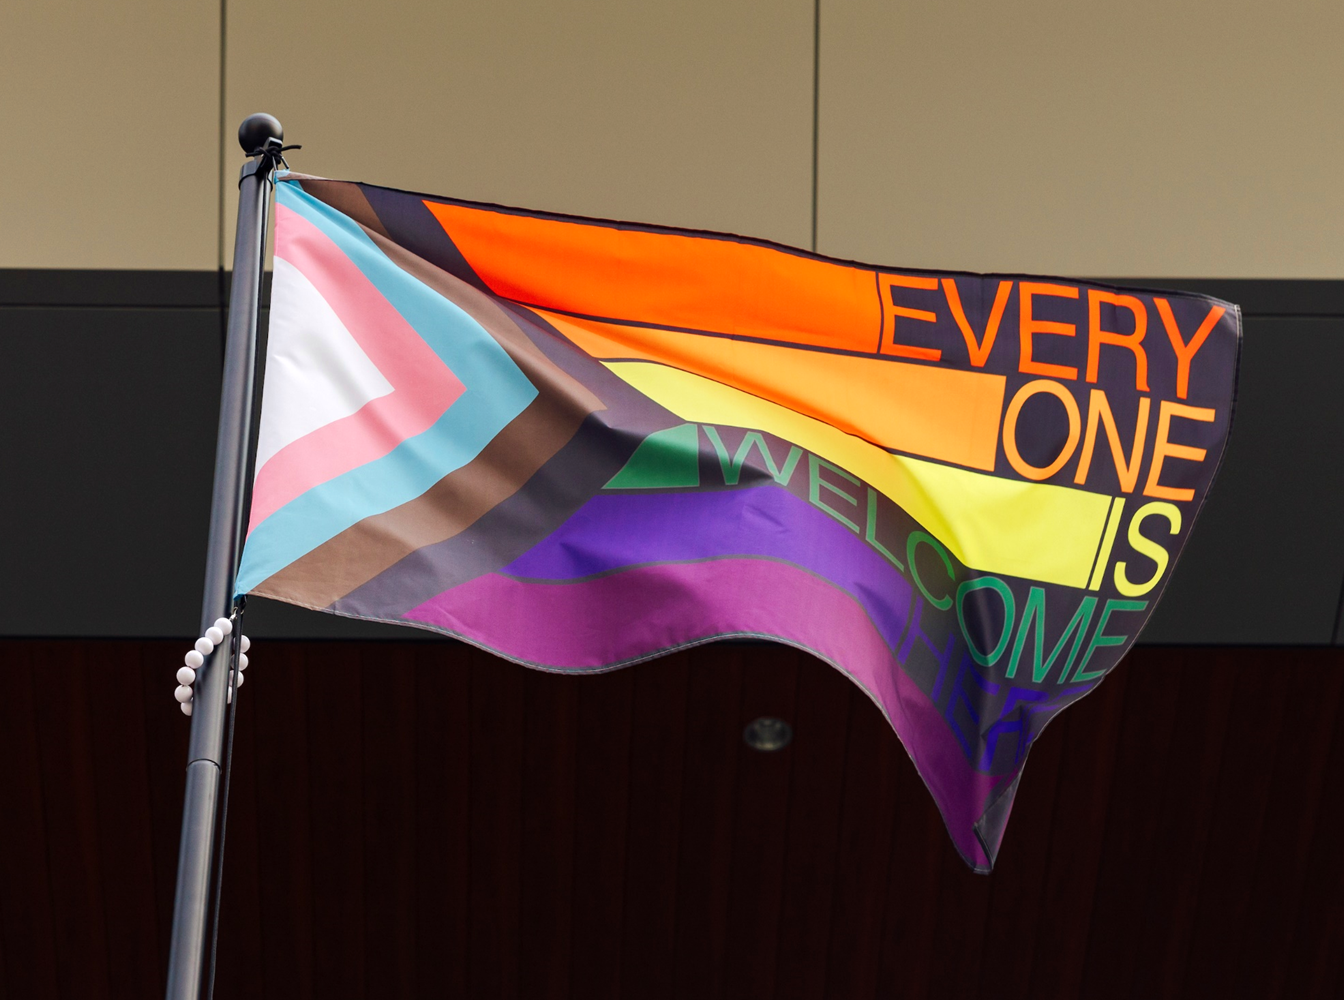 A Pride Progress flag that reads "Every one is welcome here" with each word in a different color of the rainbow